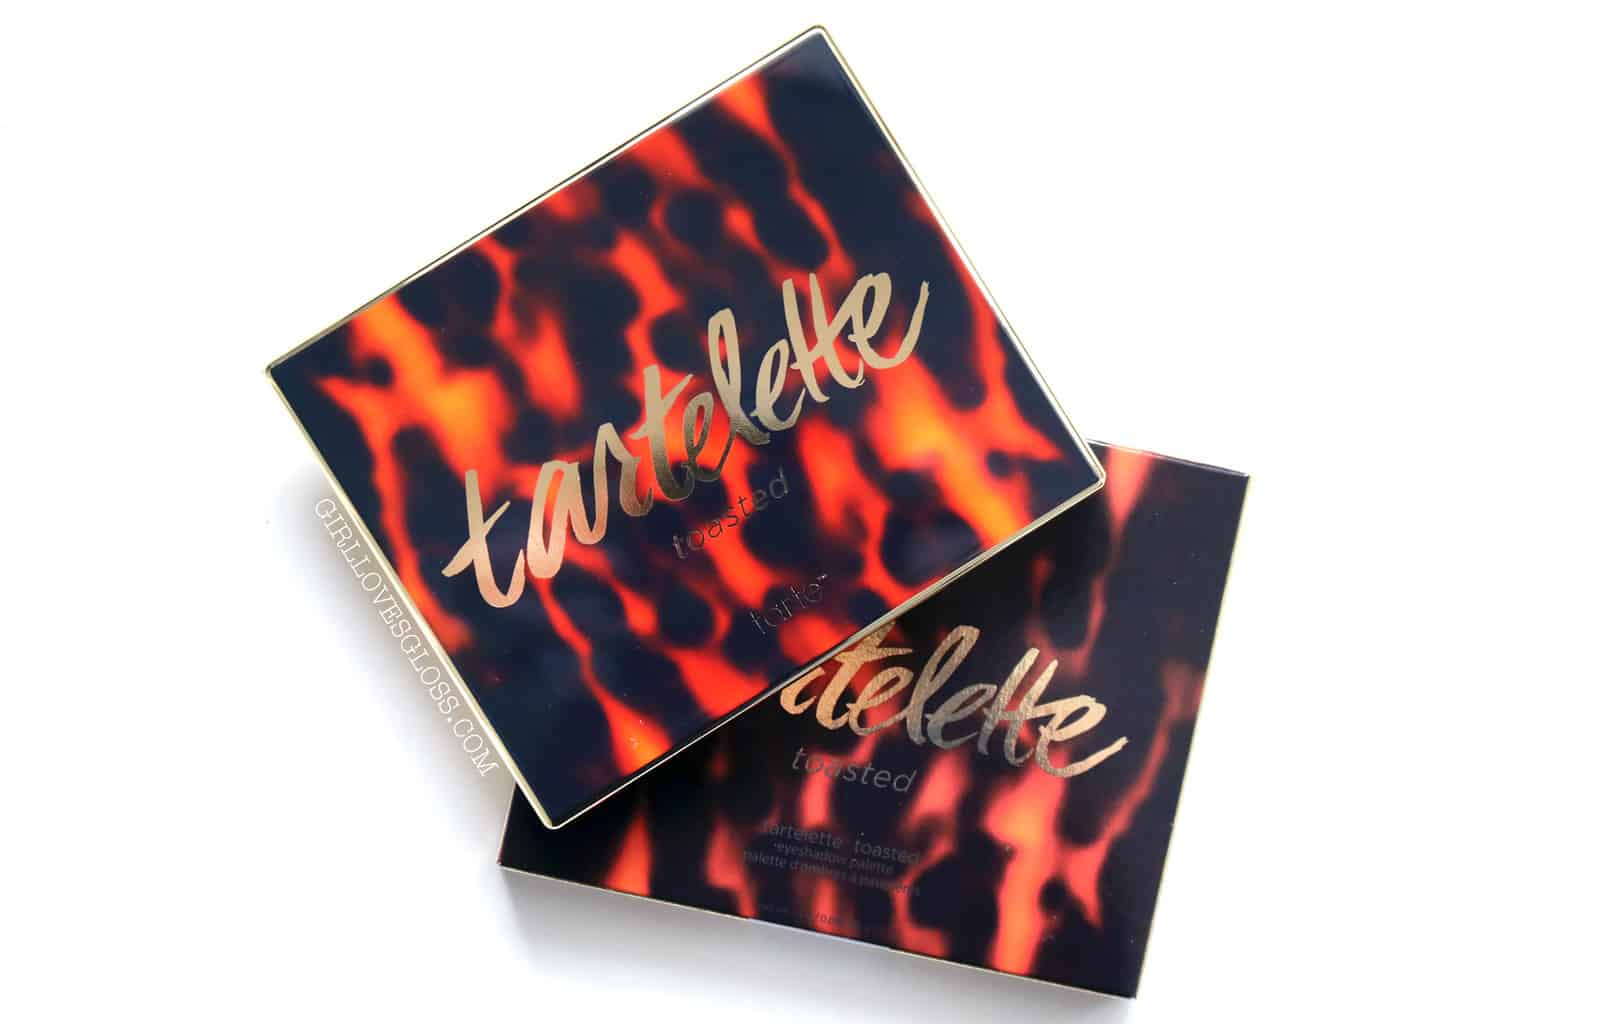 Tarte Toasted Palette | Just Another Warm Palette?